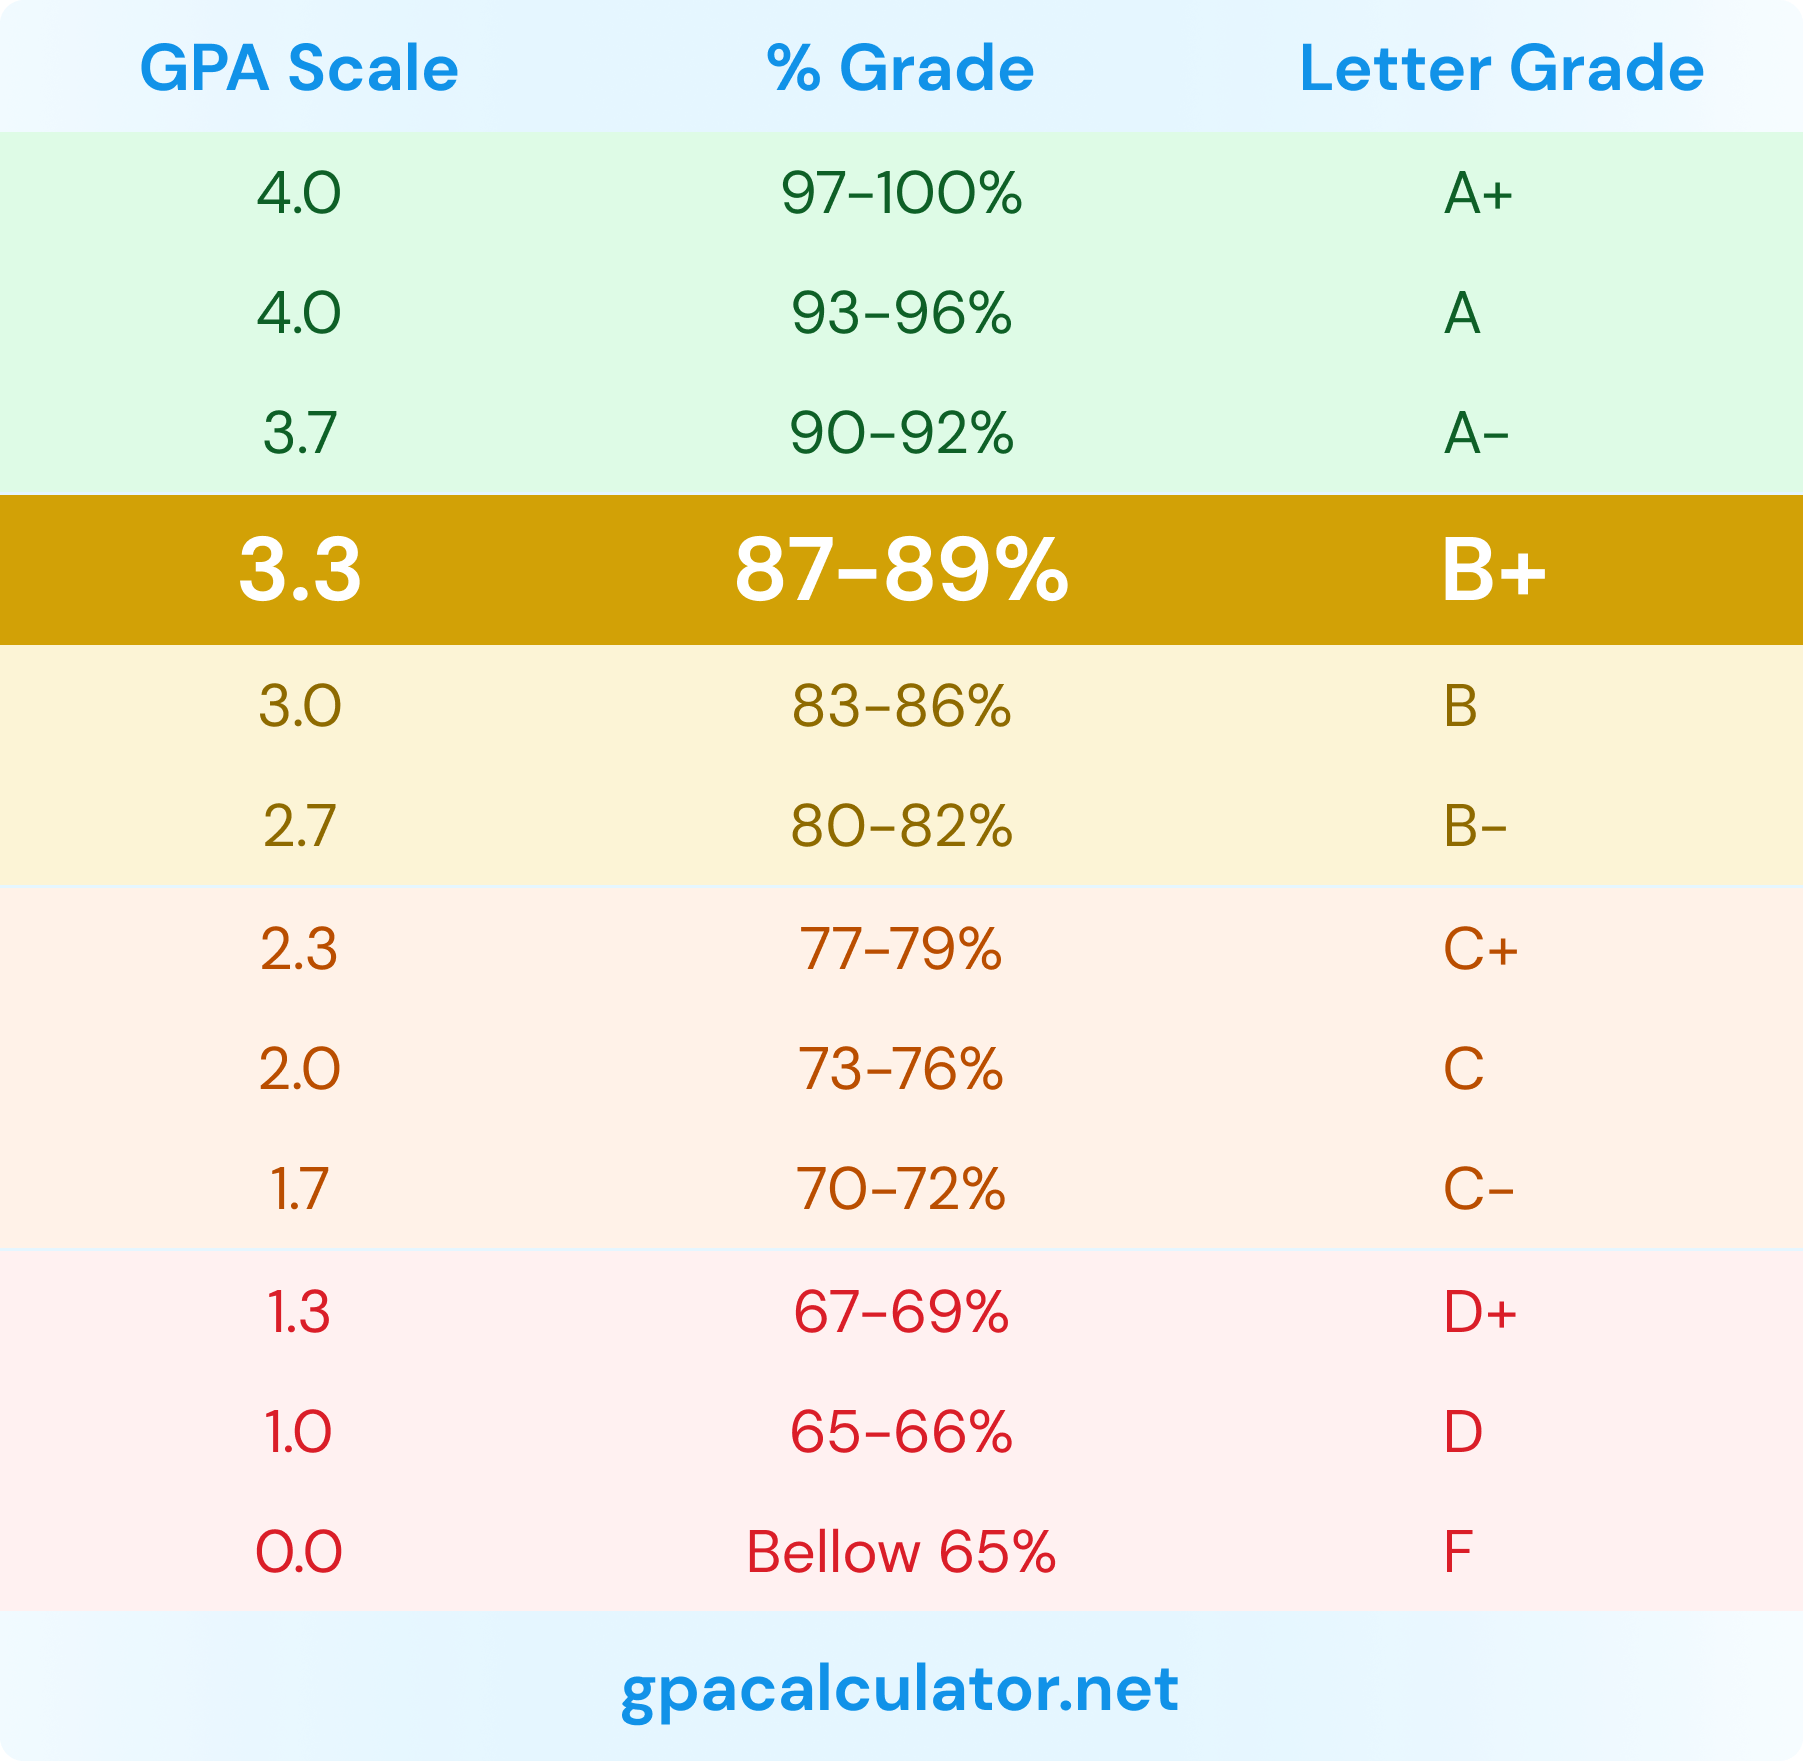 3.3 GPA equals to 87-89% or a B+